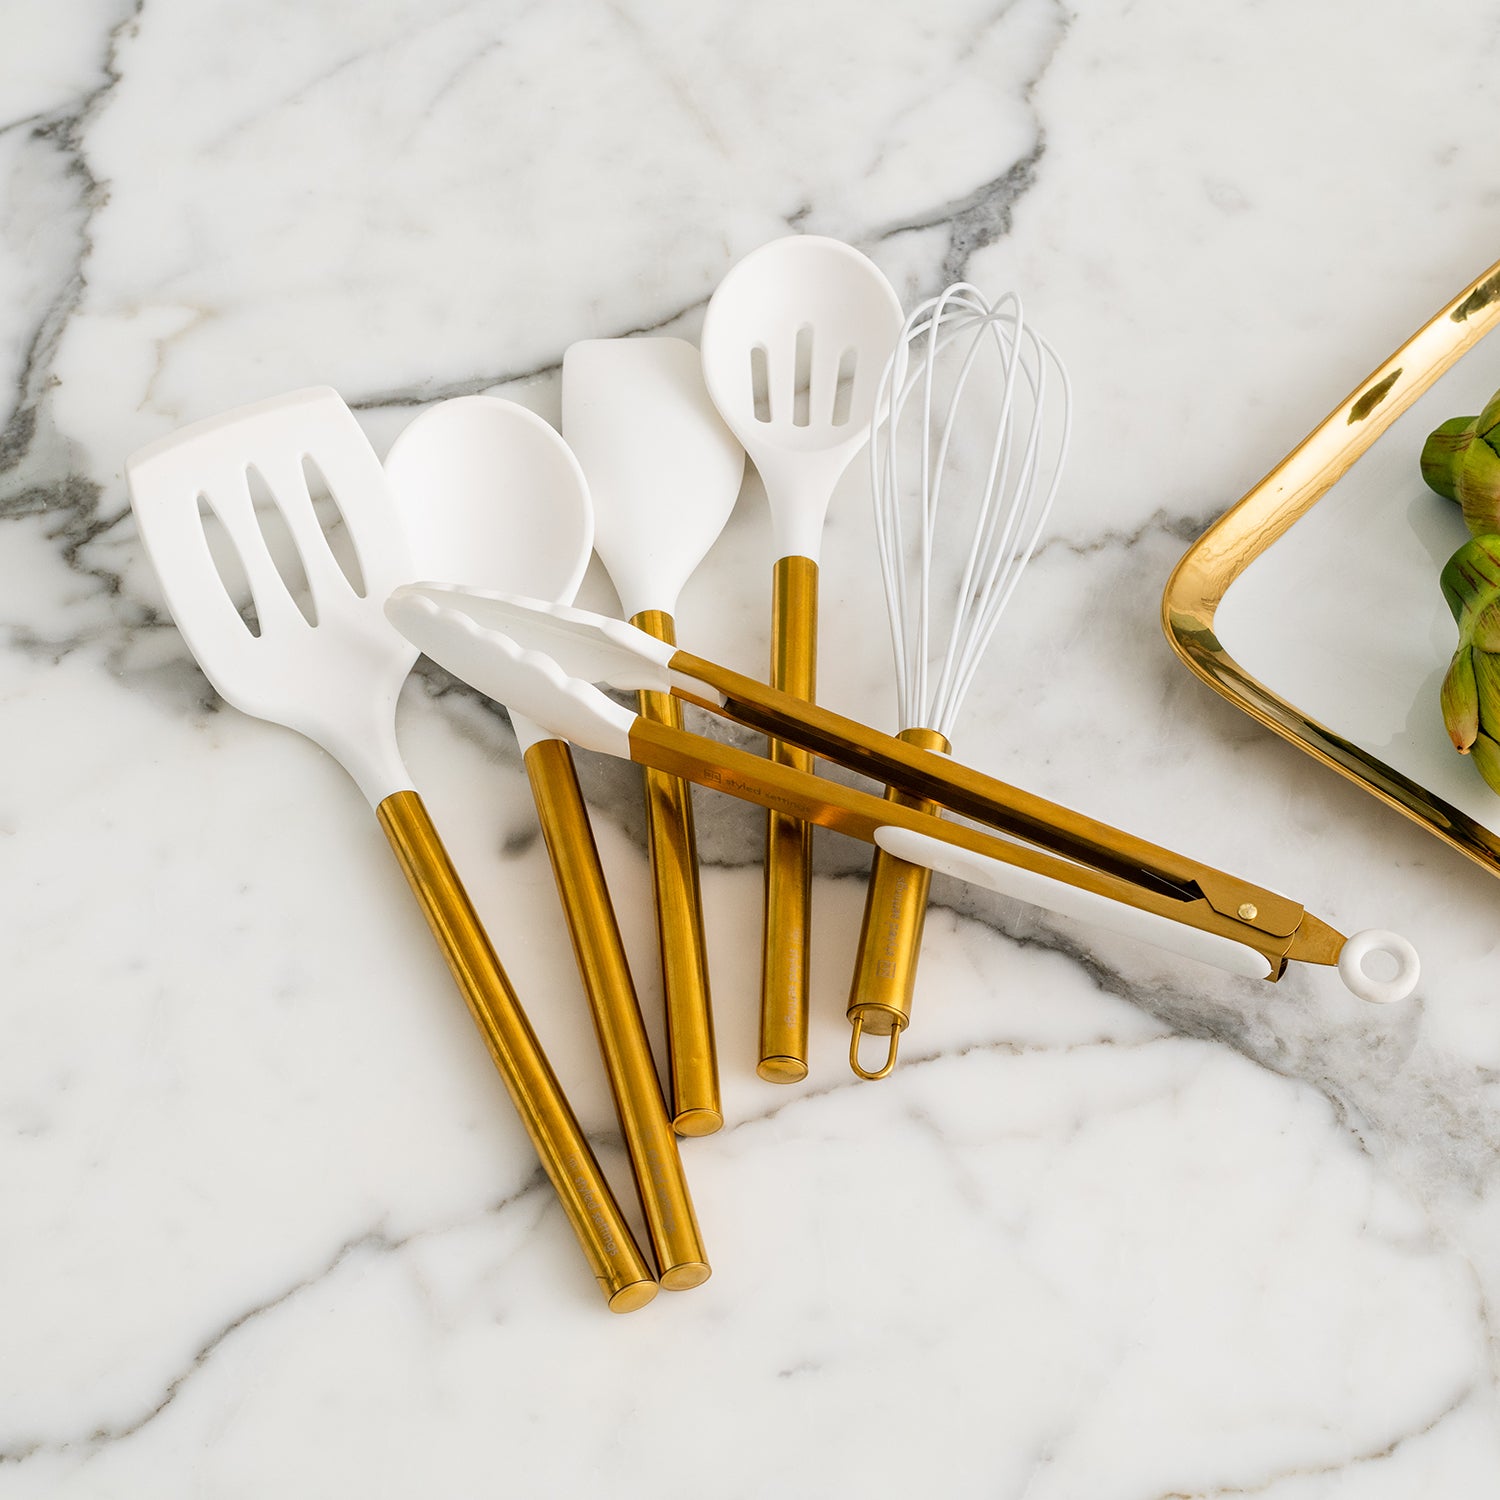 Styled Settings Gold Stainless Steel Cooking Utensils Set